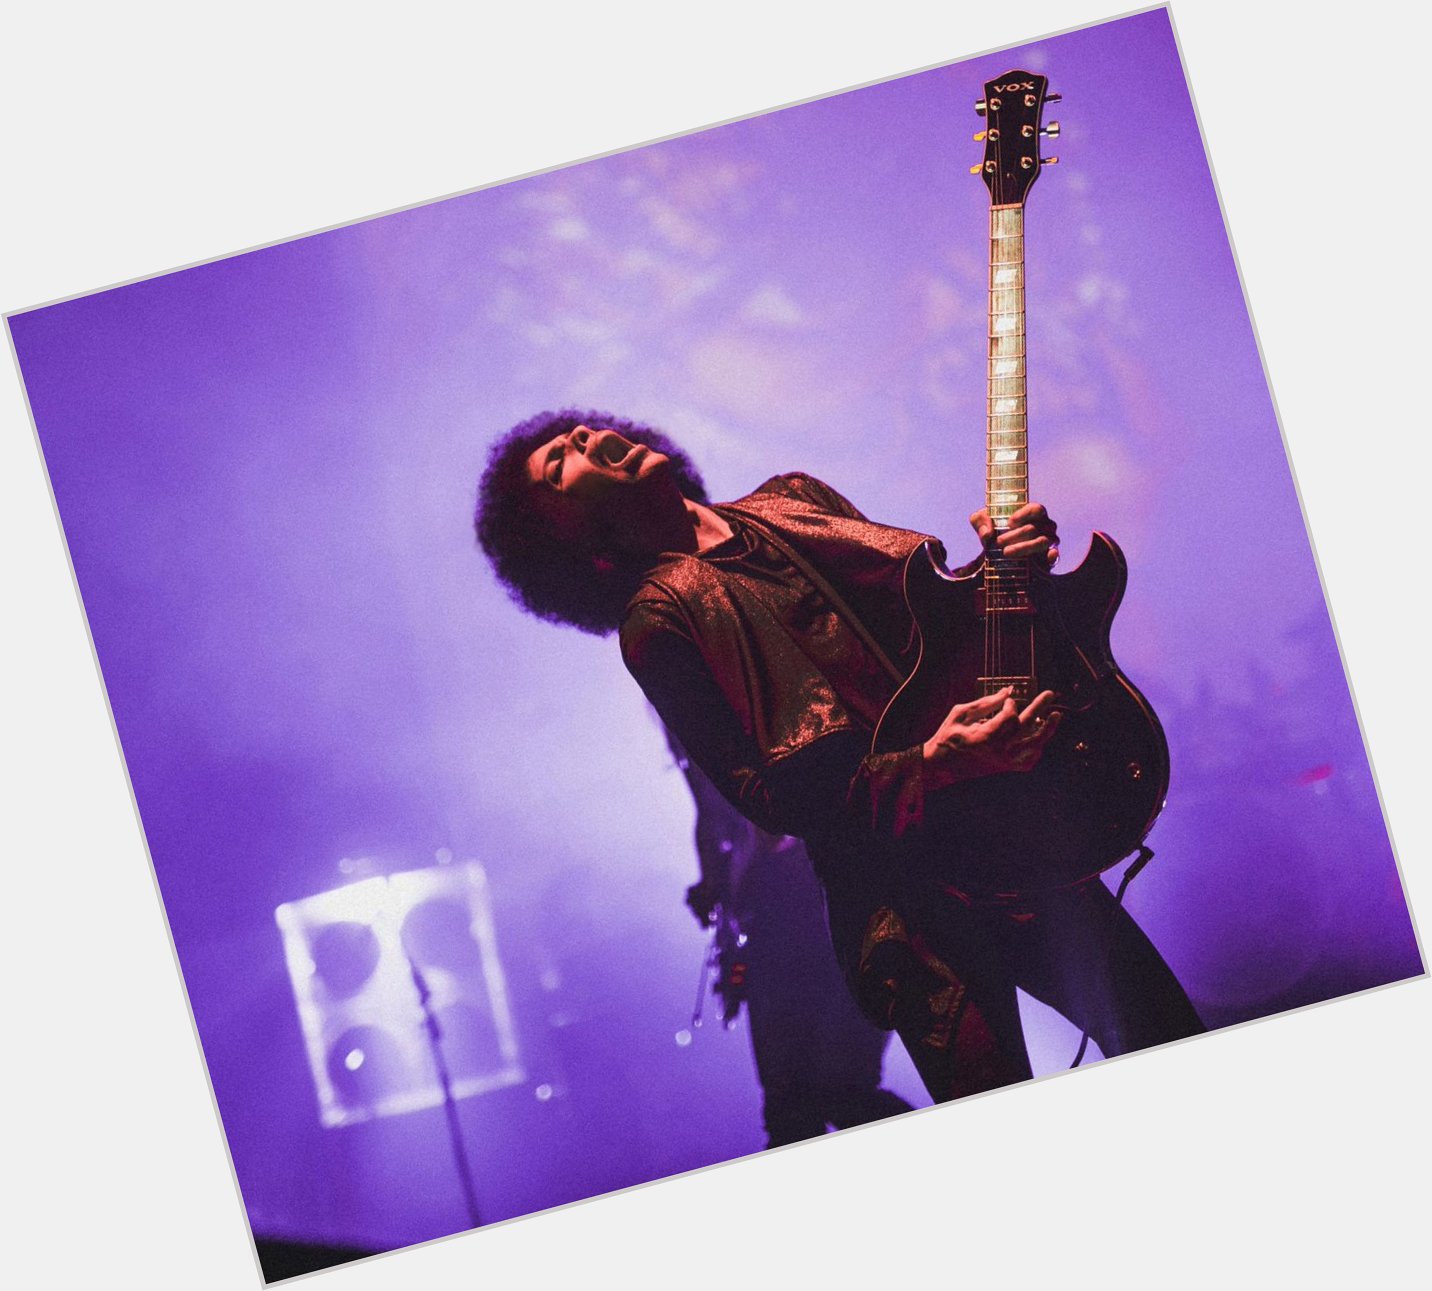 When Doves Cry..we play it! Tune in right now to listen! Happy birthday, Prince!  